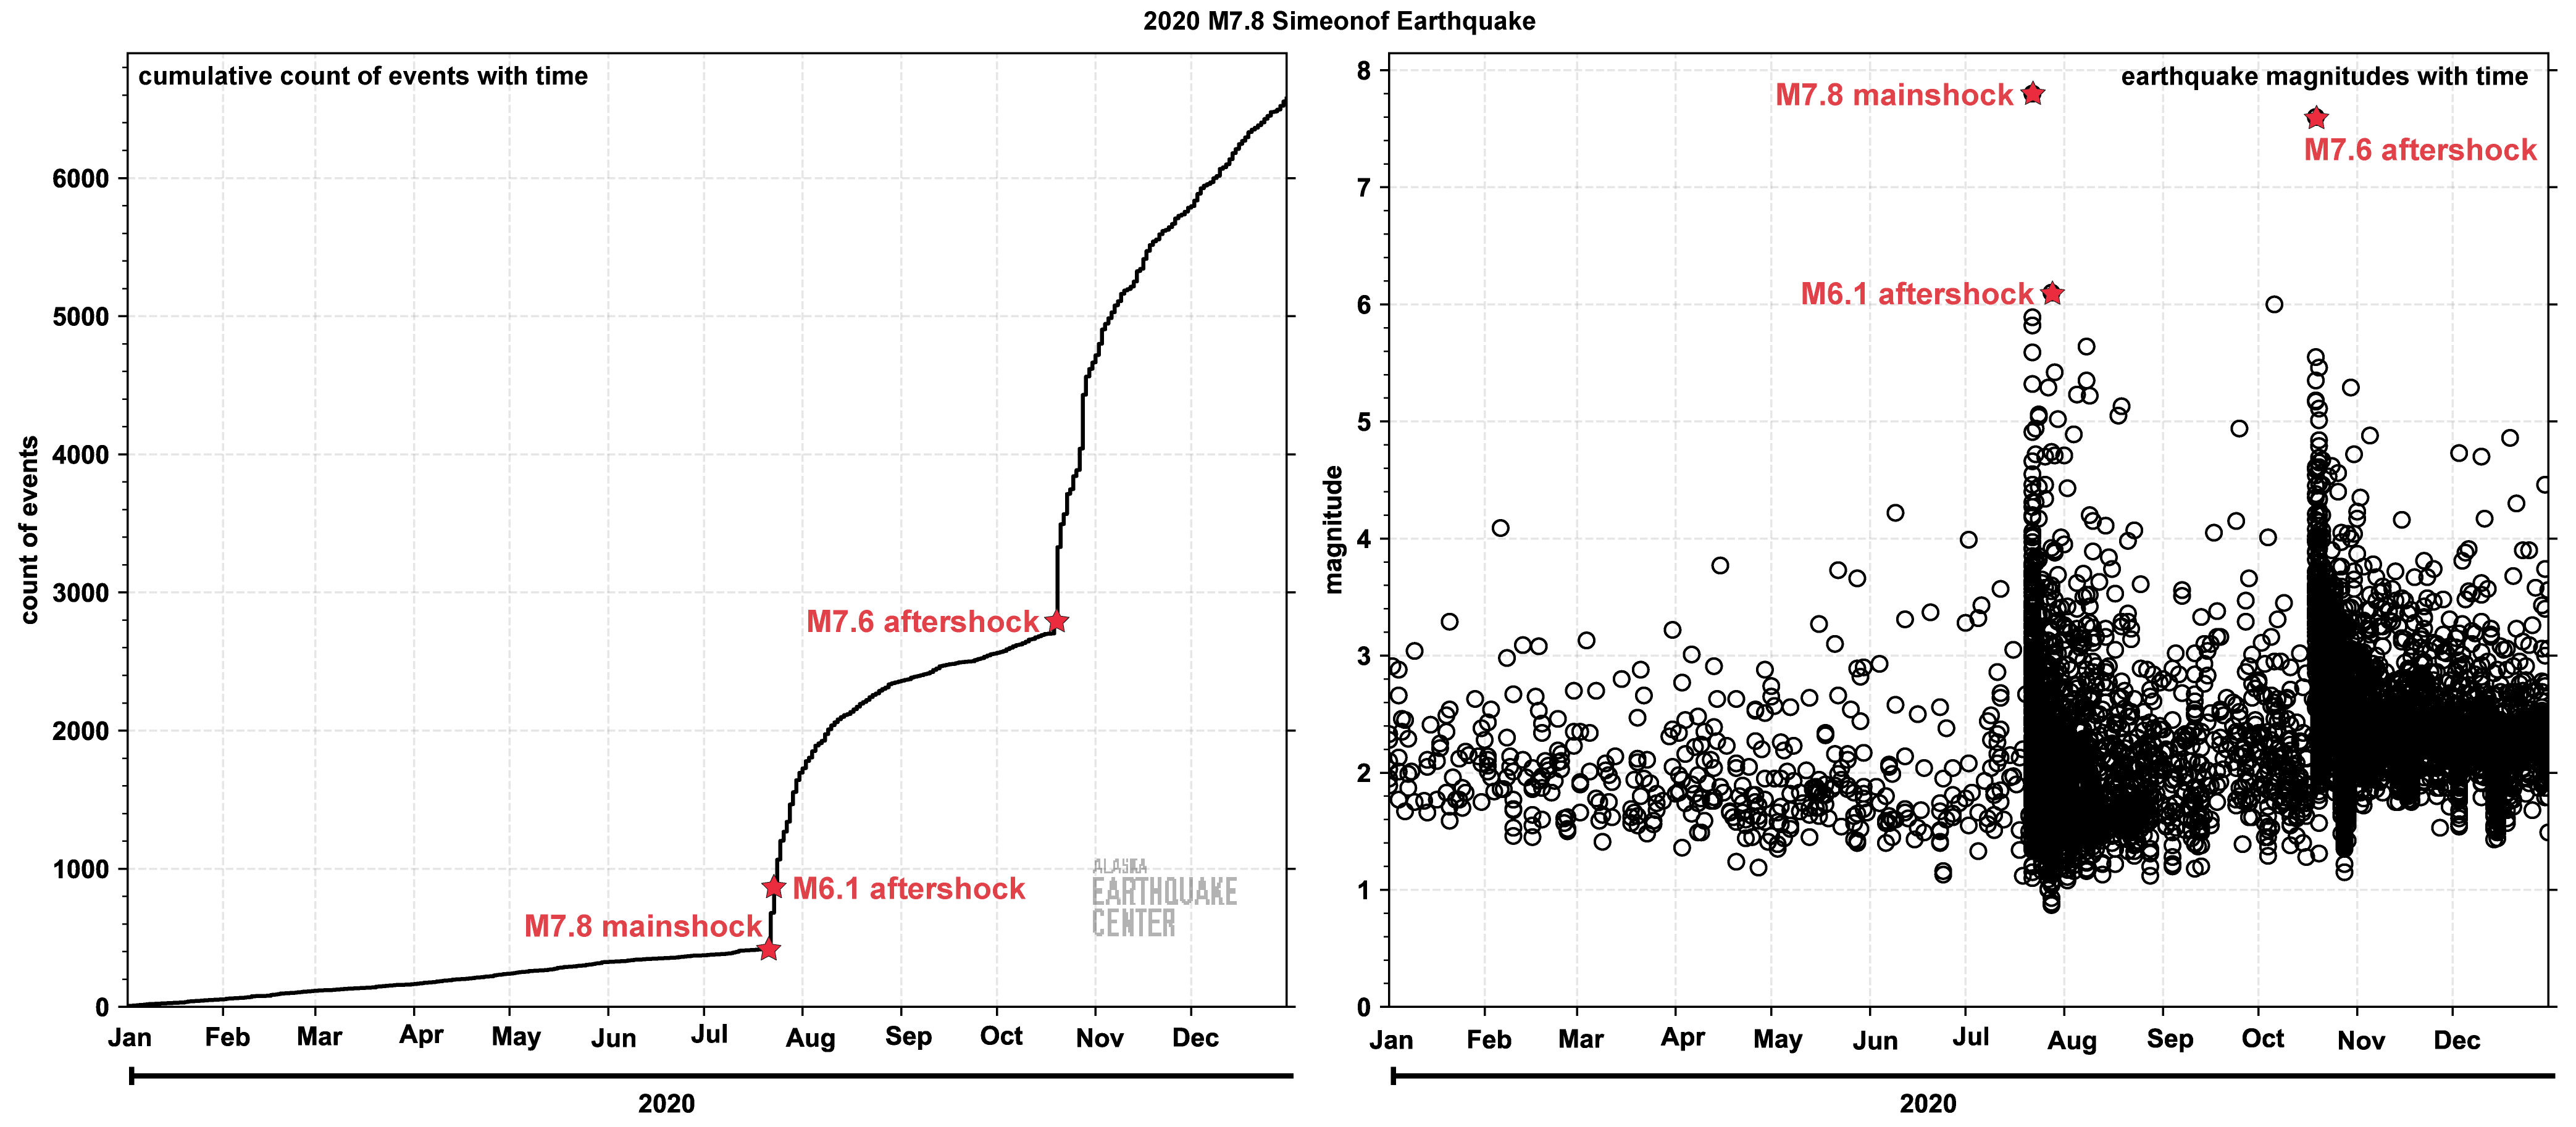 (L) The cumulative number of earthquakes in the Simeonof earthquake region. (R) The magnitudes of the each earthquake in the sequence plotted in time.